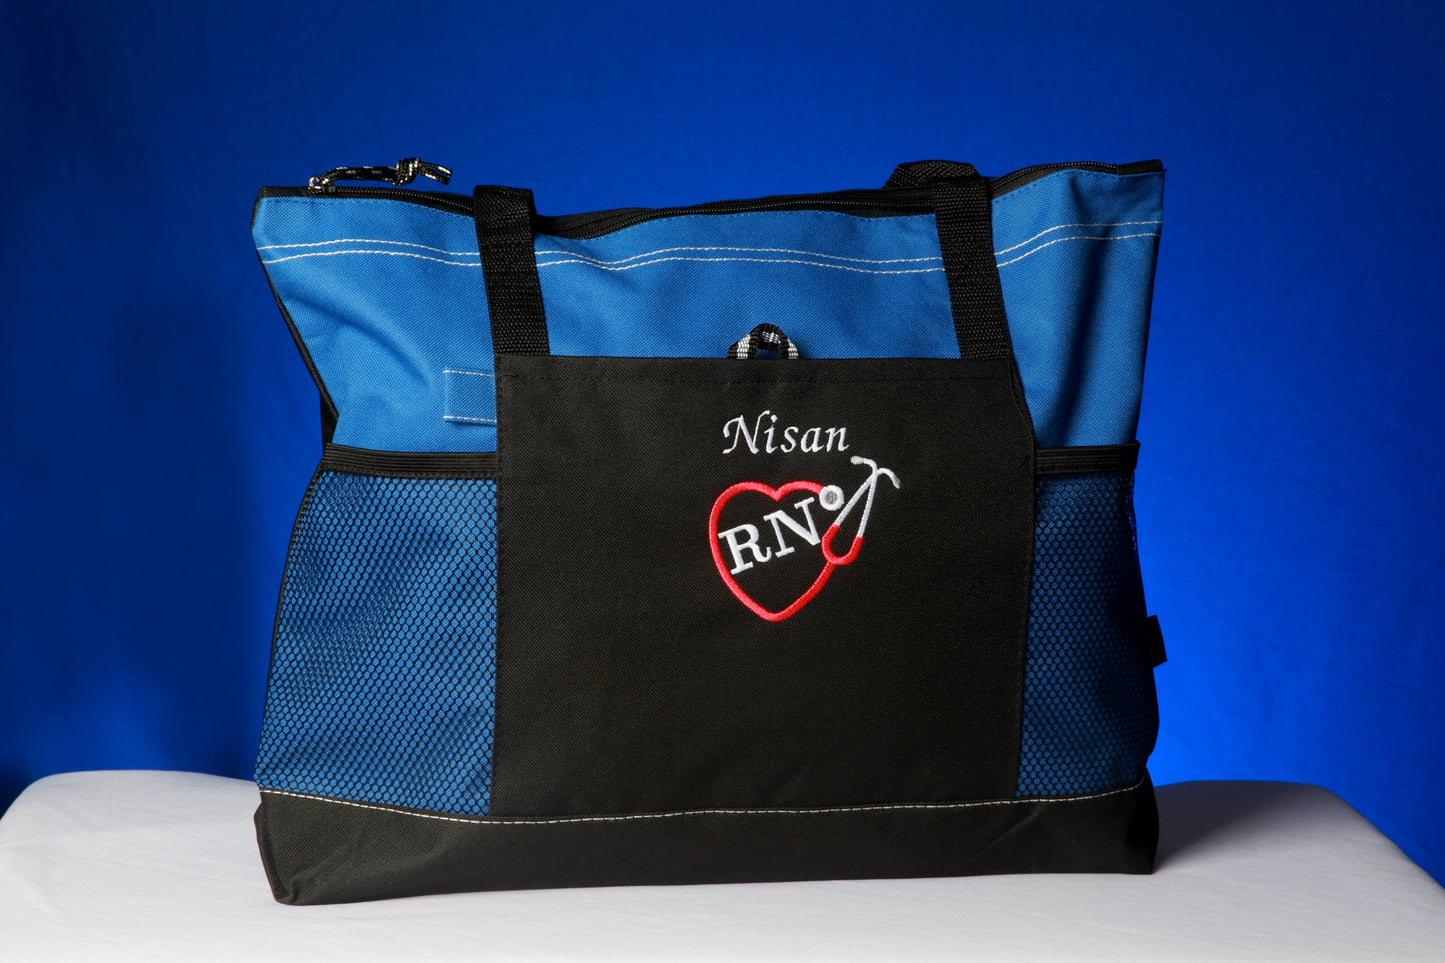 Nurse Tote Bags - Personalized  For RN, LPN, CNA, CMA, MA, ANY TITLE Blue